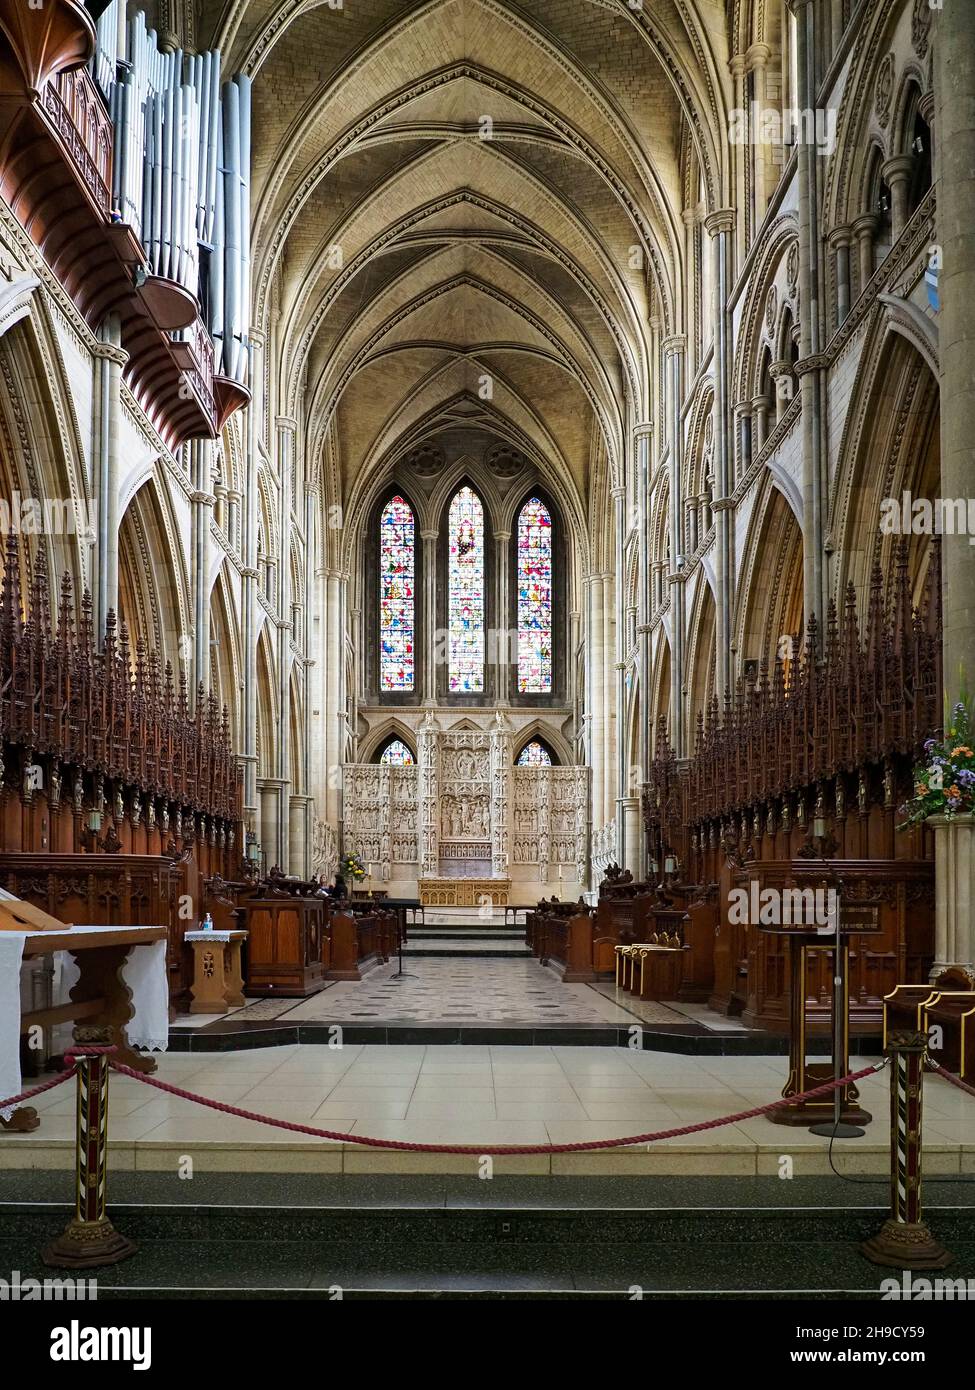 Interiors of Truro Cathedral in Cornwall England Stock Photo